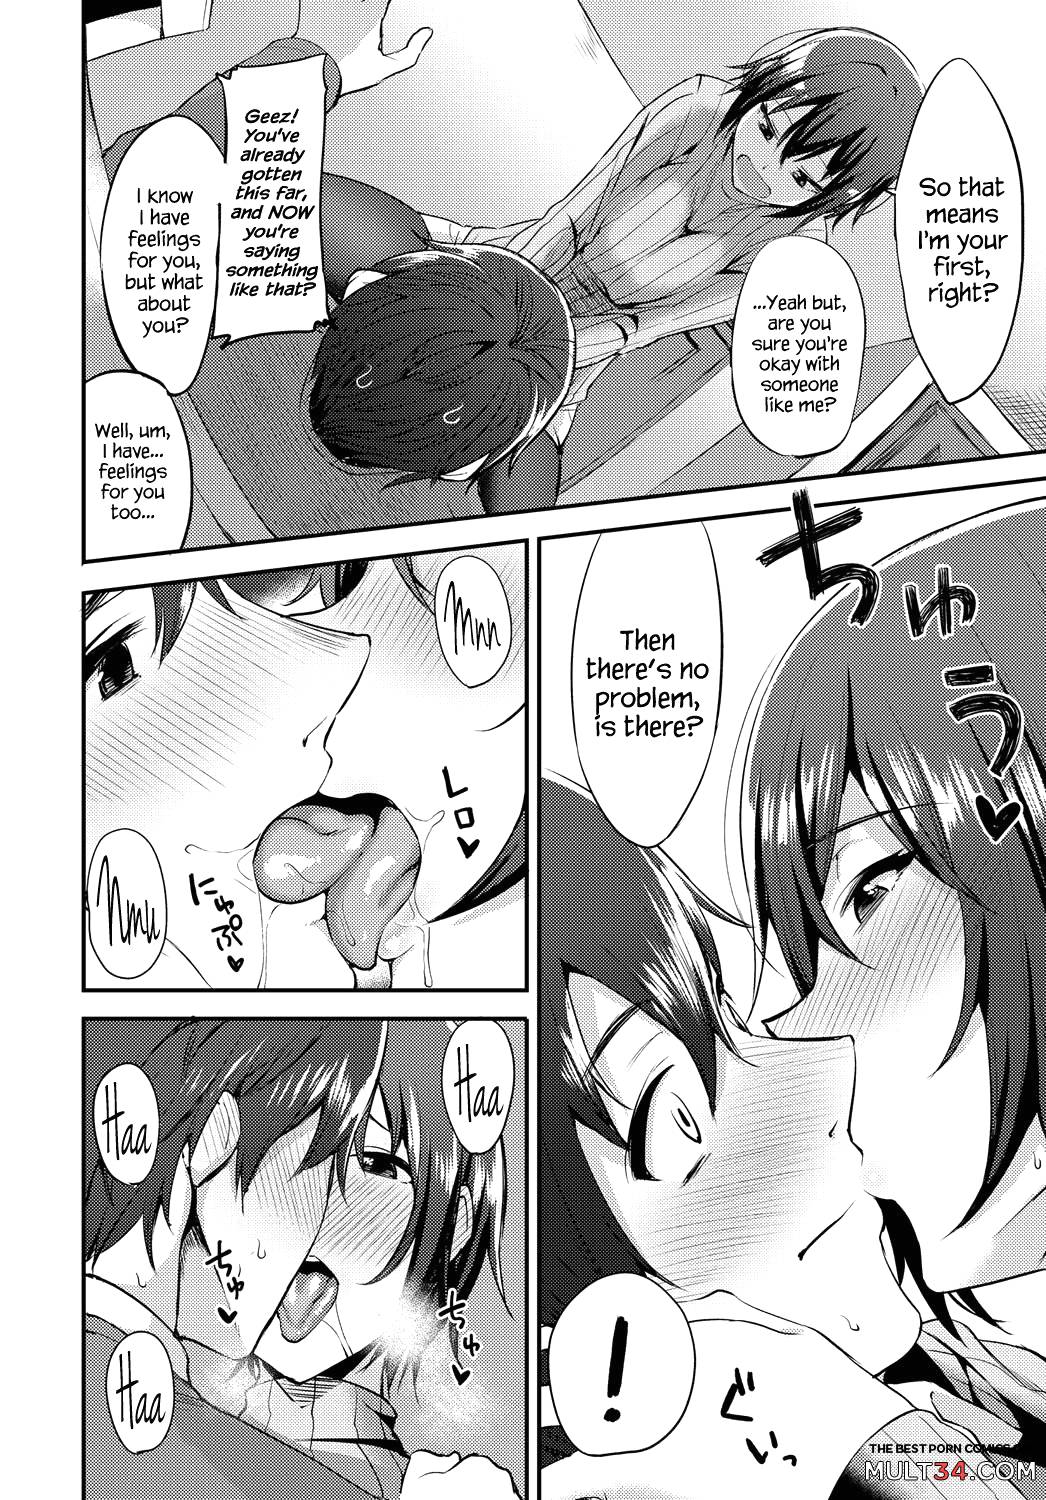 Does Senpai Not Like This Kind of Thing!? page 6